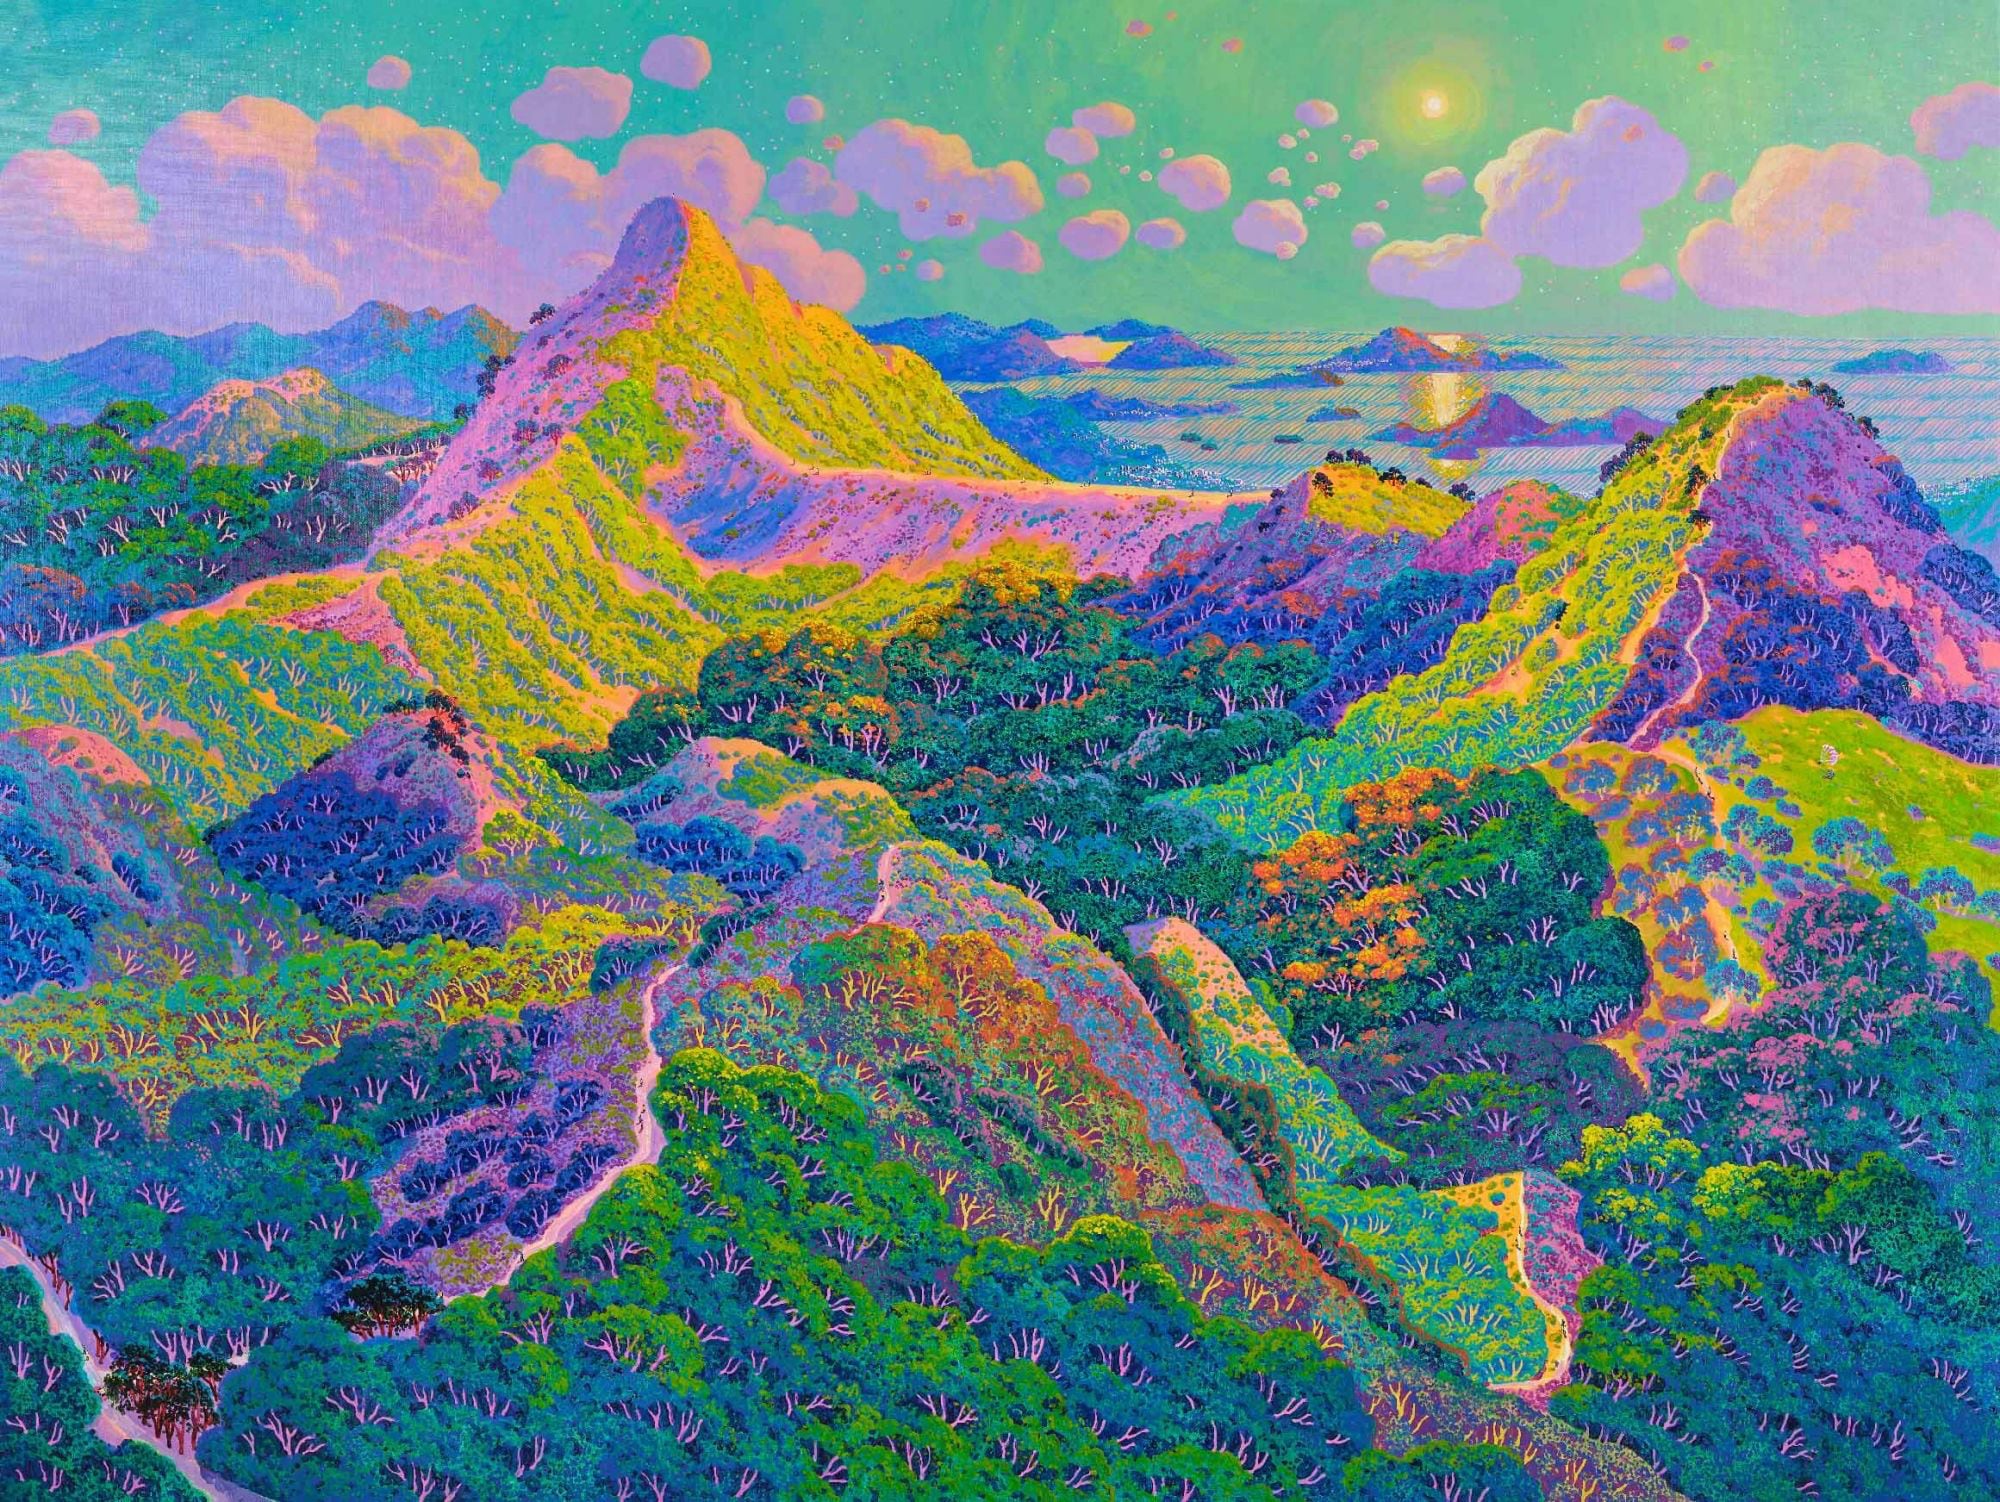 Memories Emerge in Stephen Wong Chun Hei’s Paintings as Vivid Saturated Landscapes